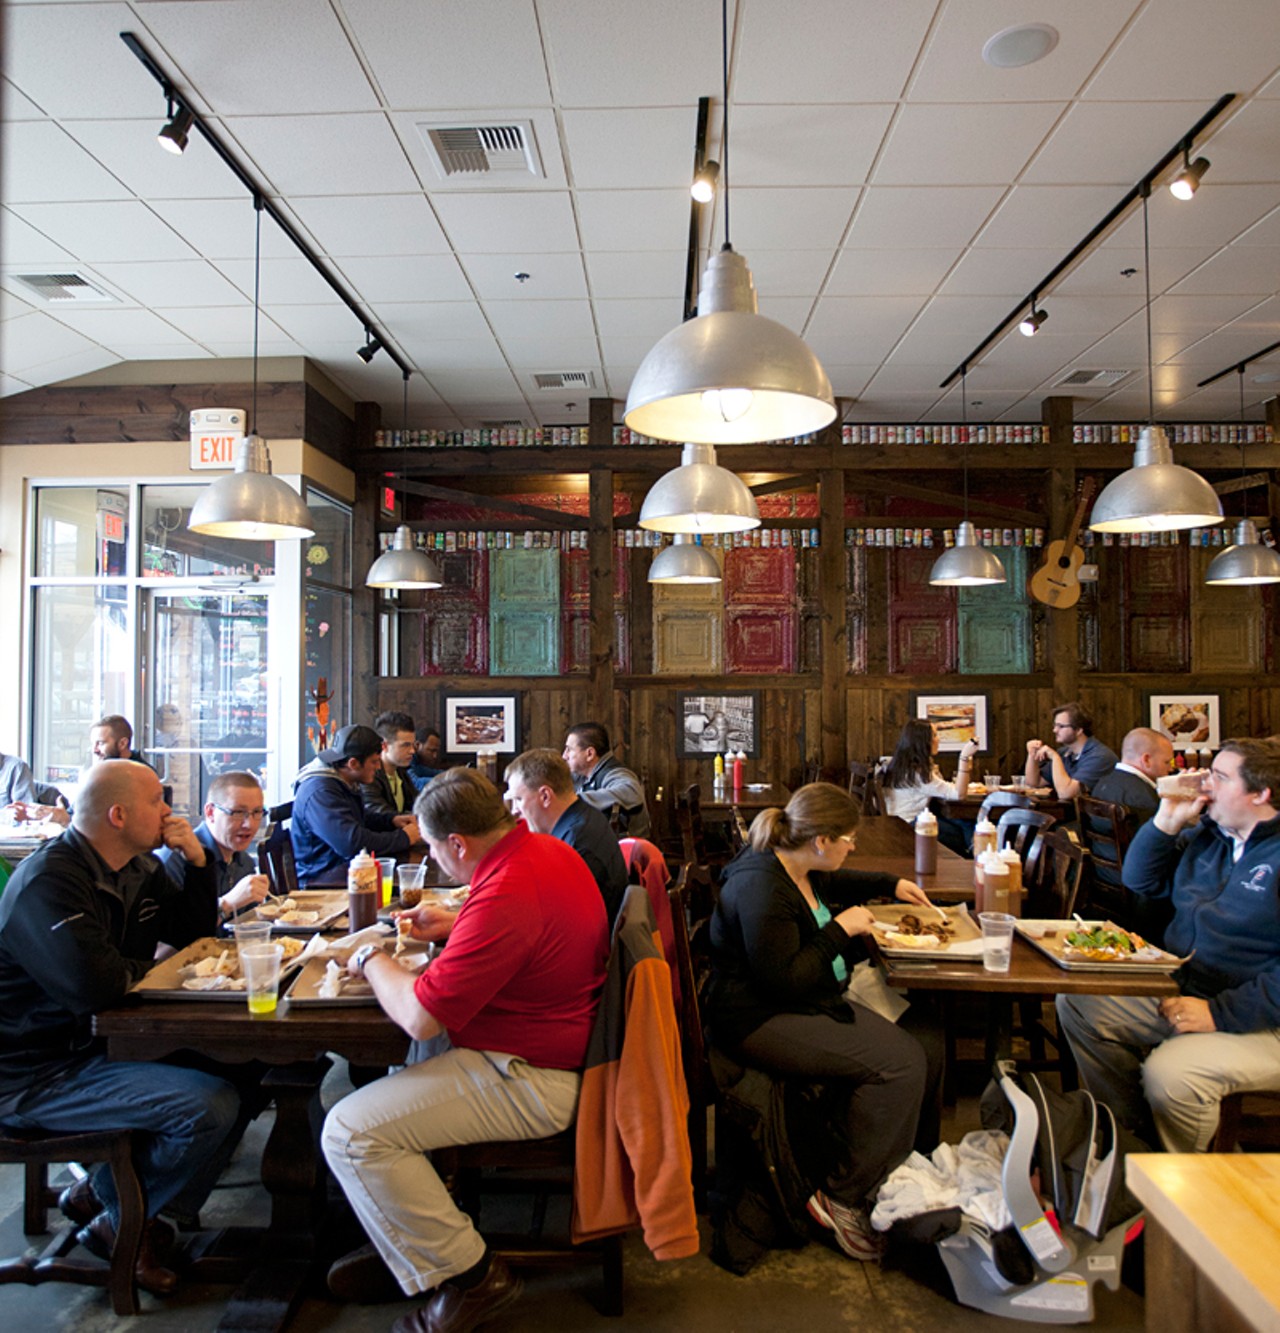 Lunch crowd at Sugarfire Smoke House in Olivette.